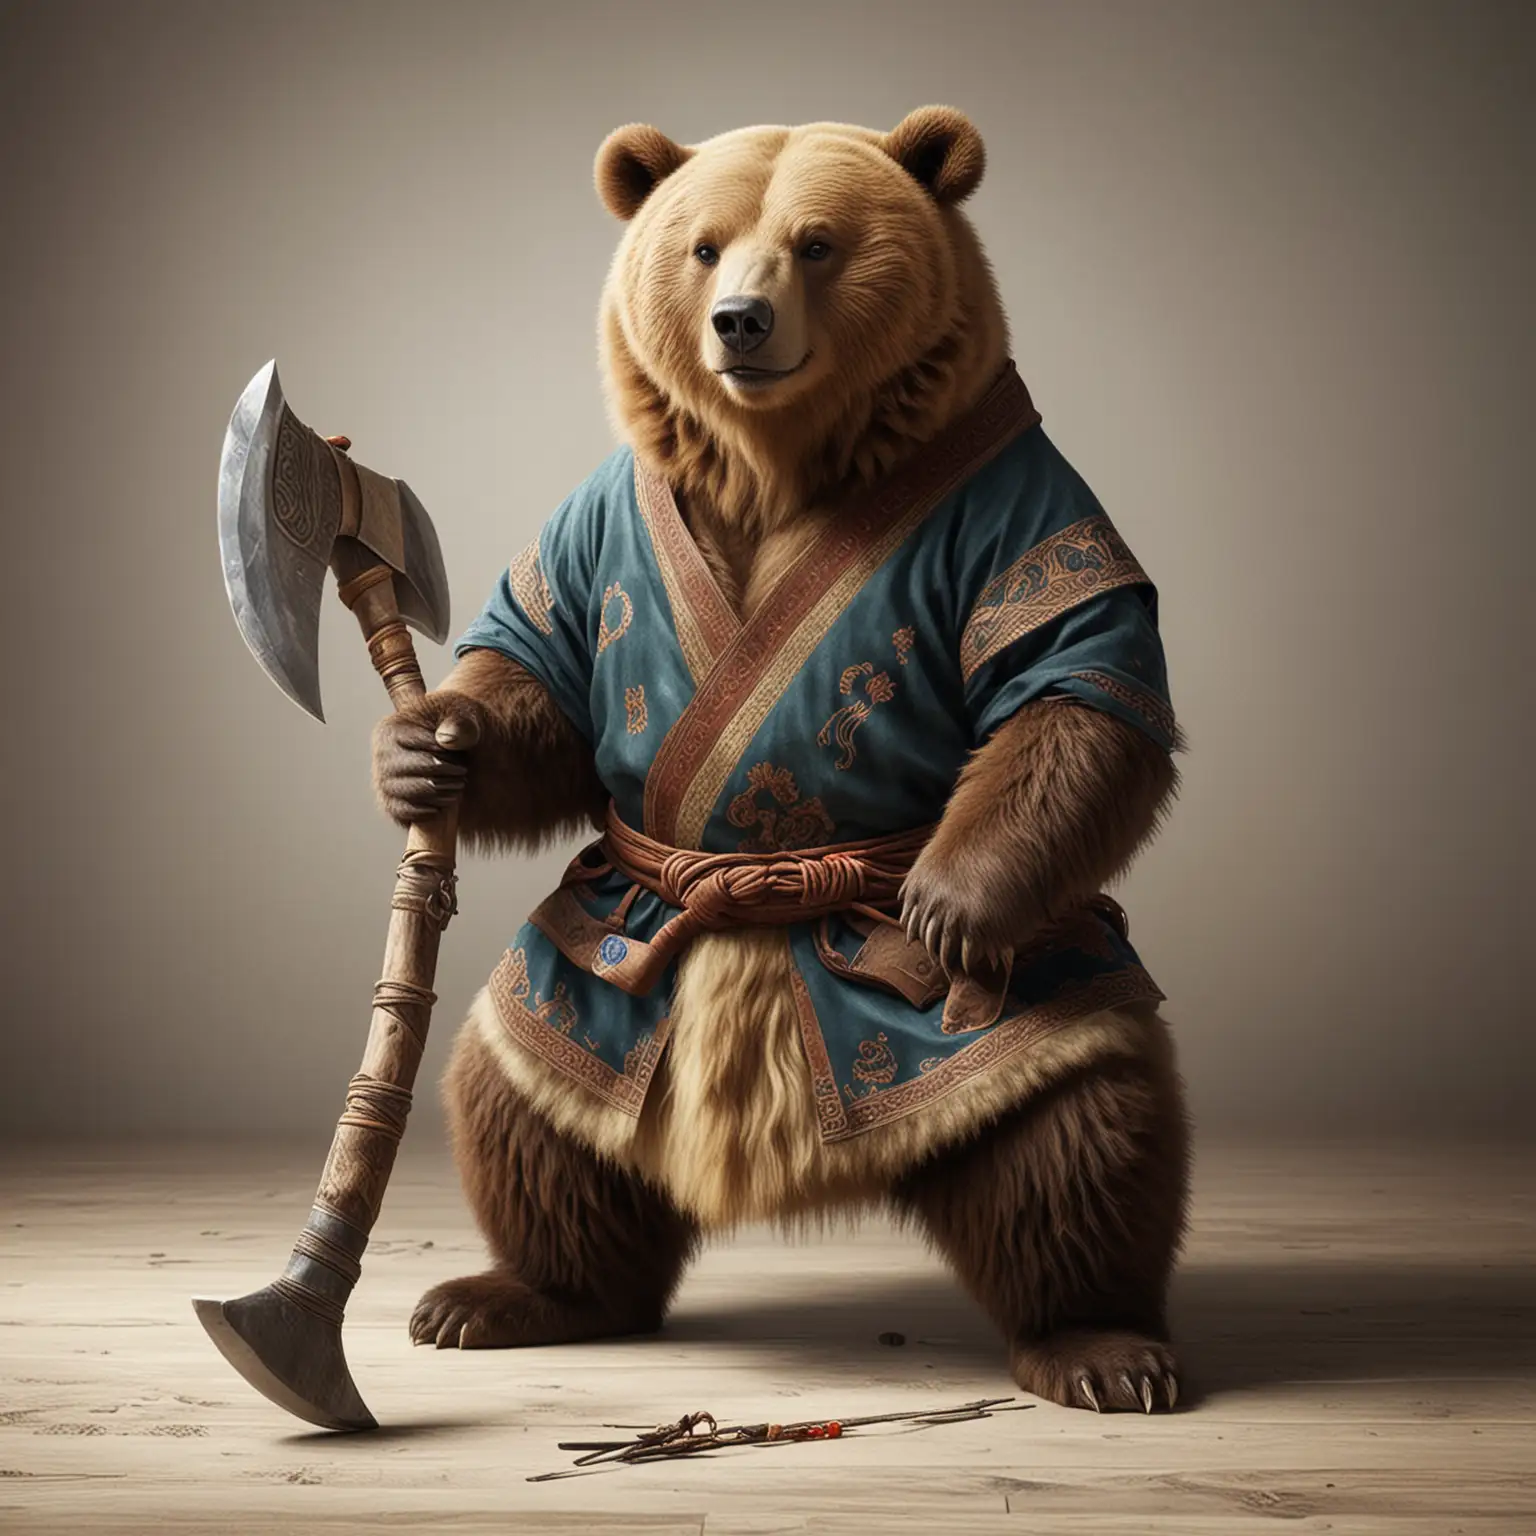 Realistic Bear in MongolianChingishan Clothing with Large Blade Ax